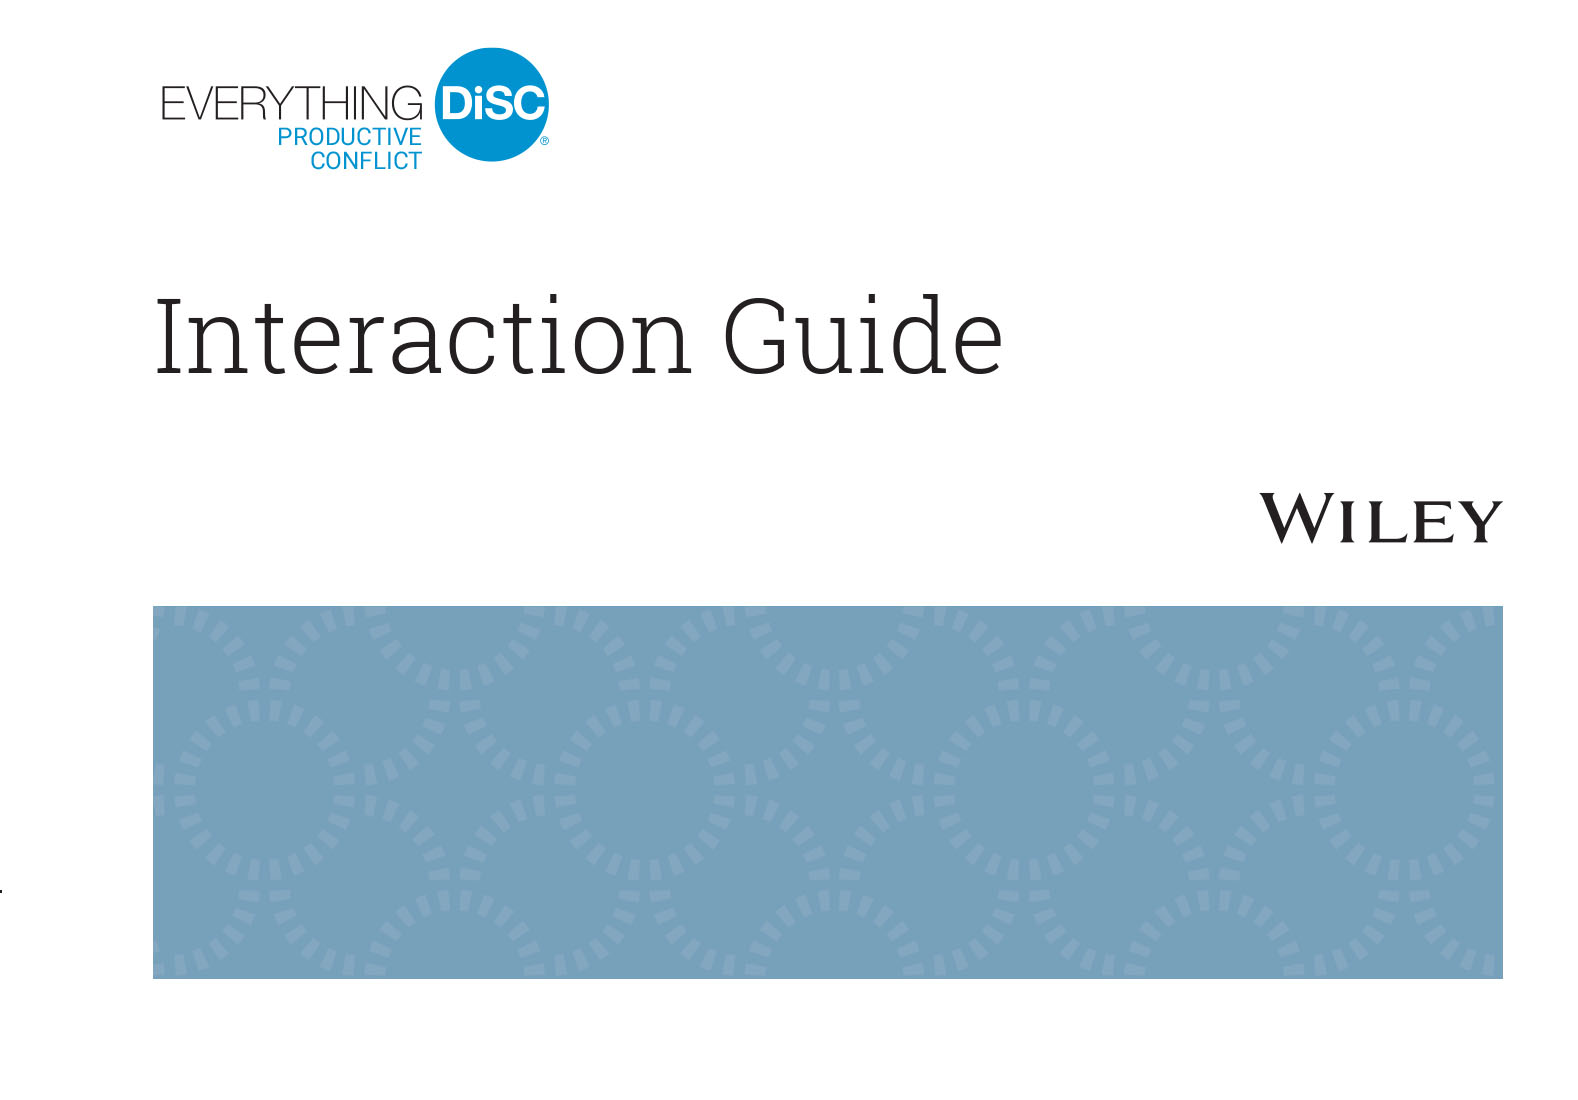 Everything DiSC Productive Conflict Interaction Guides